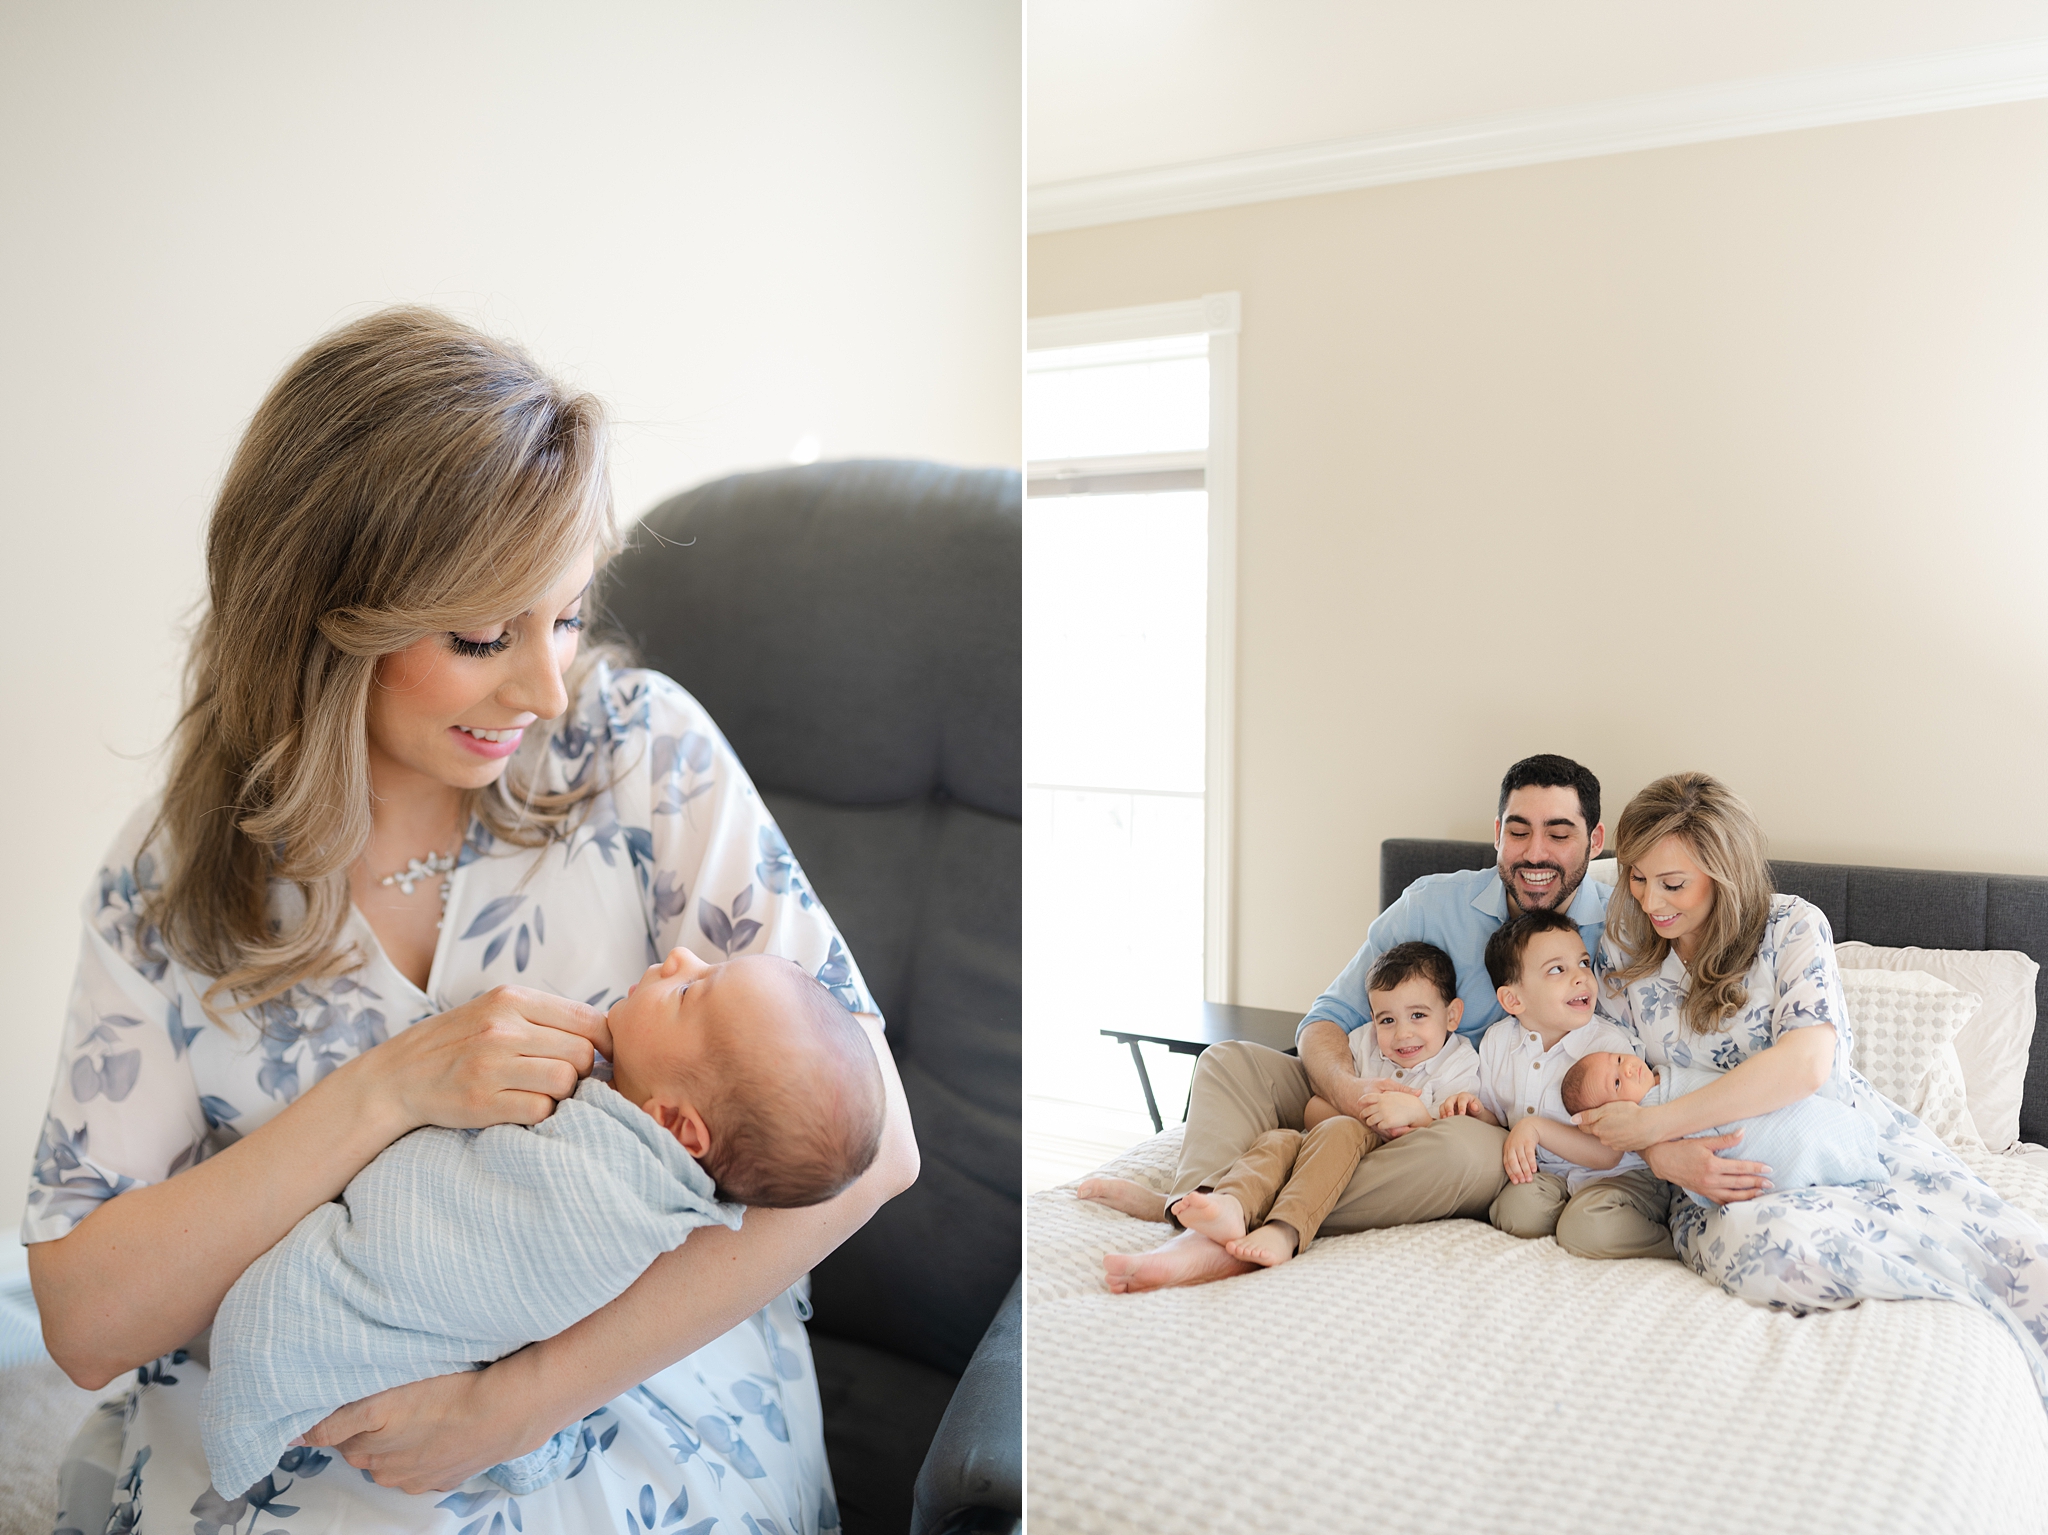 Family holding their newborn son who is swaddled. Images are taken by a Waukesha Newborn photographer